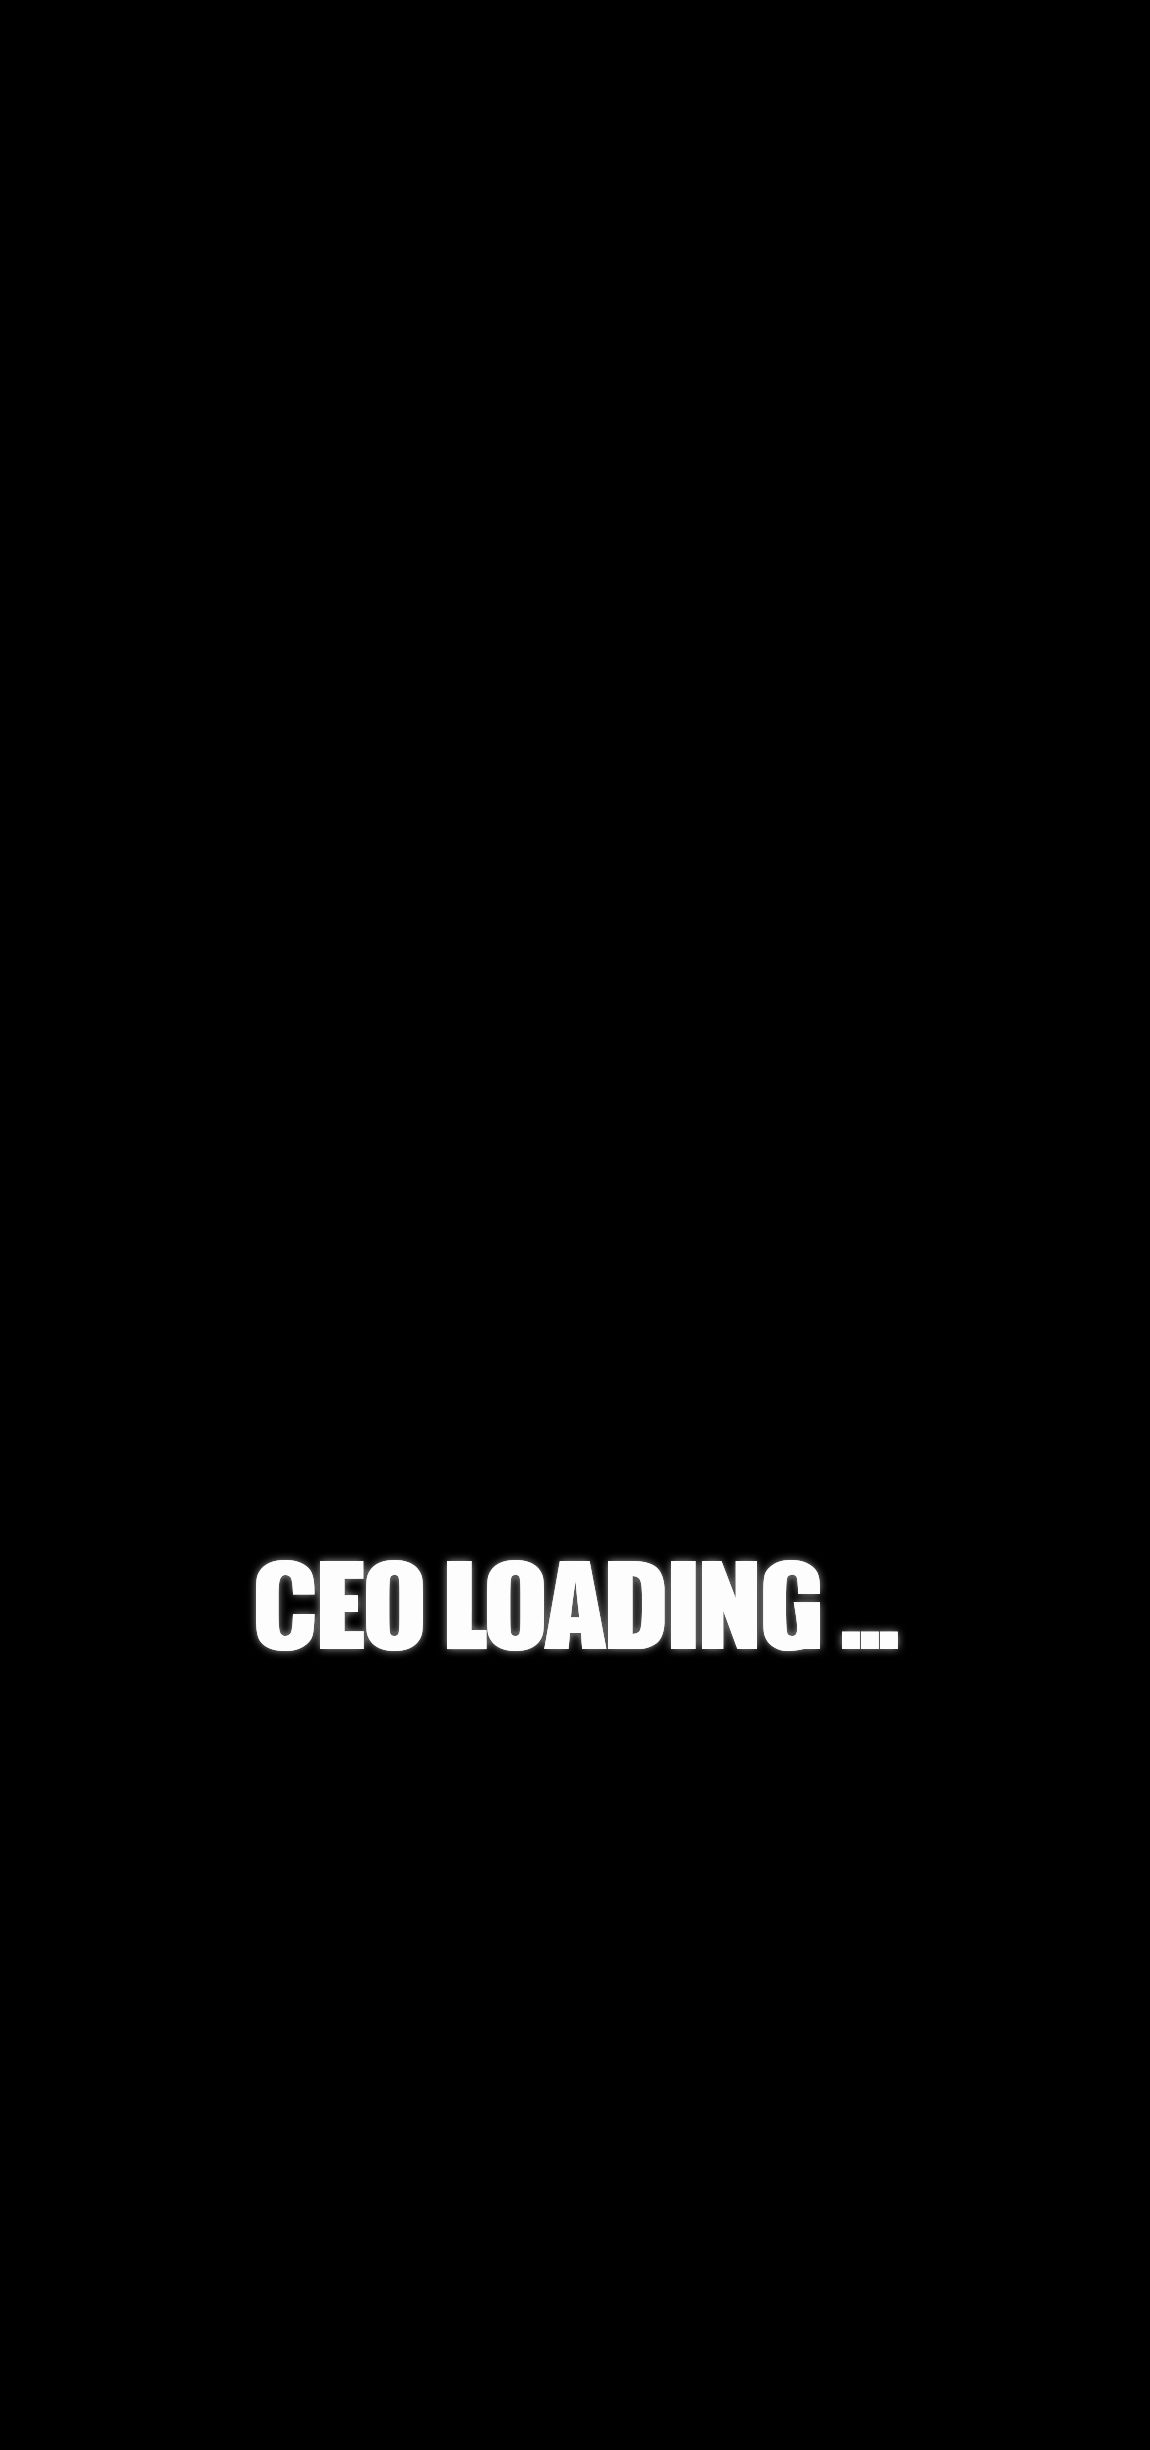 CEO LOADING. Ceo quote, Motivational wallpaper, Ceo